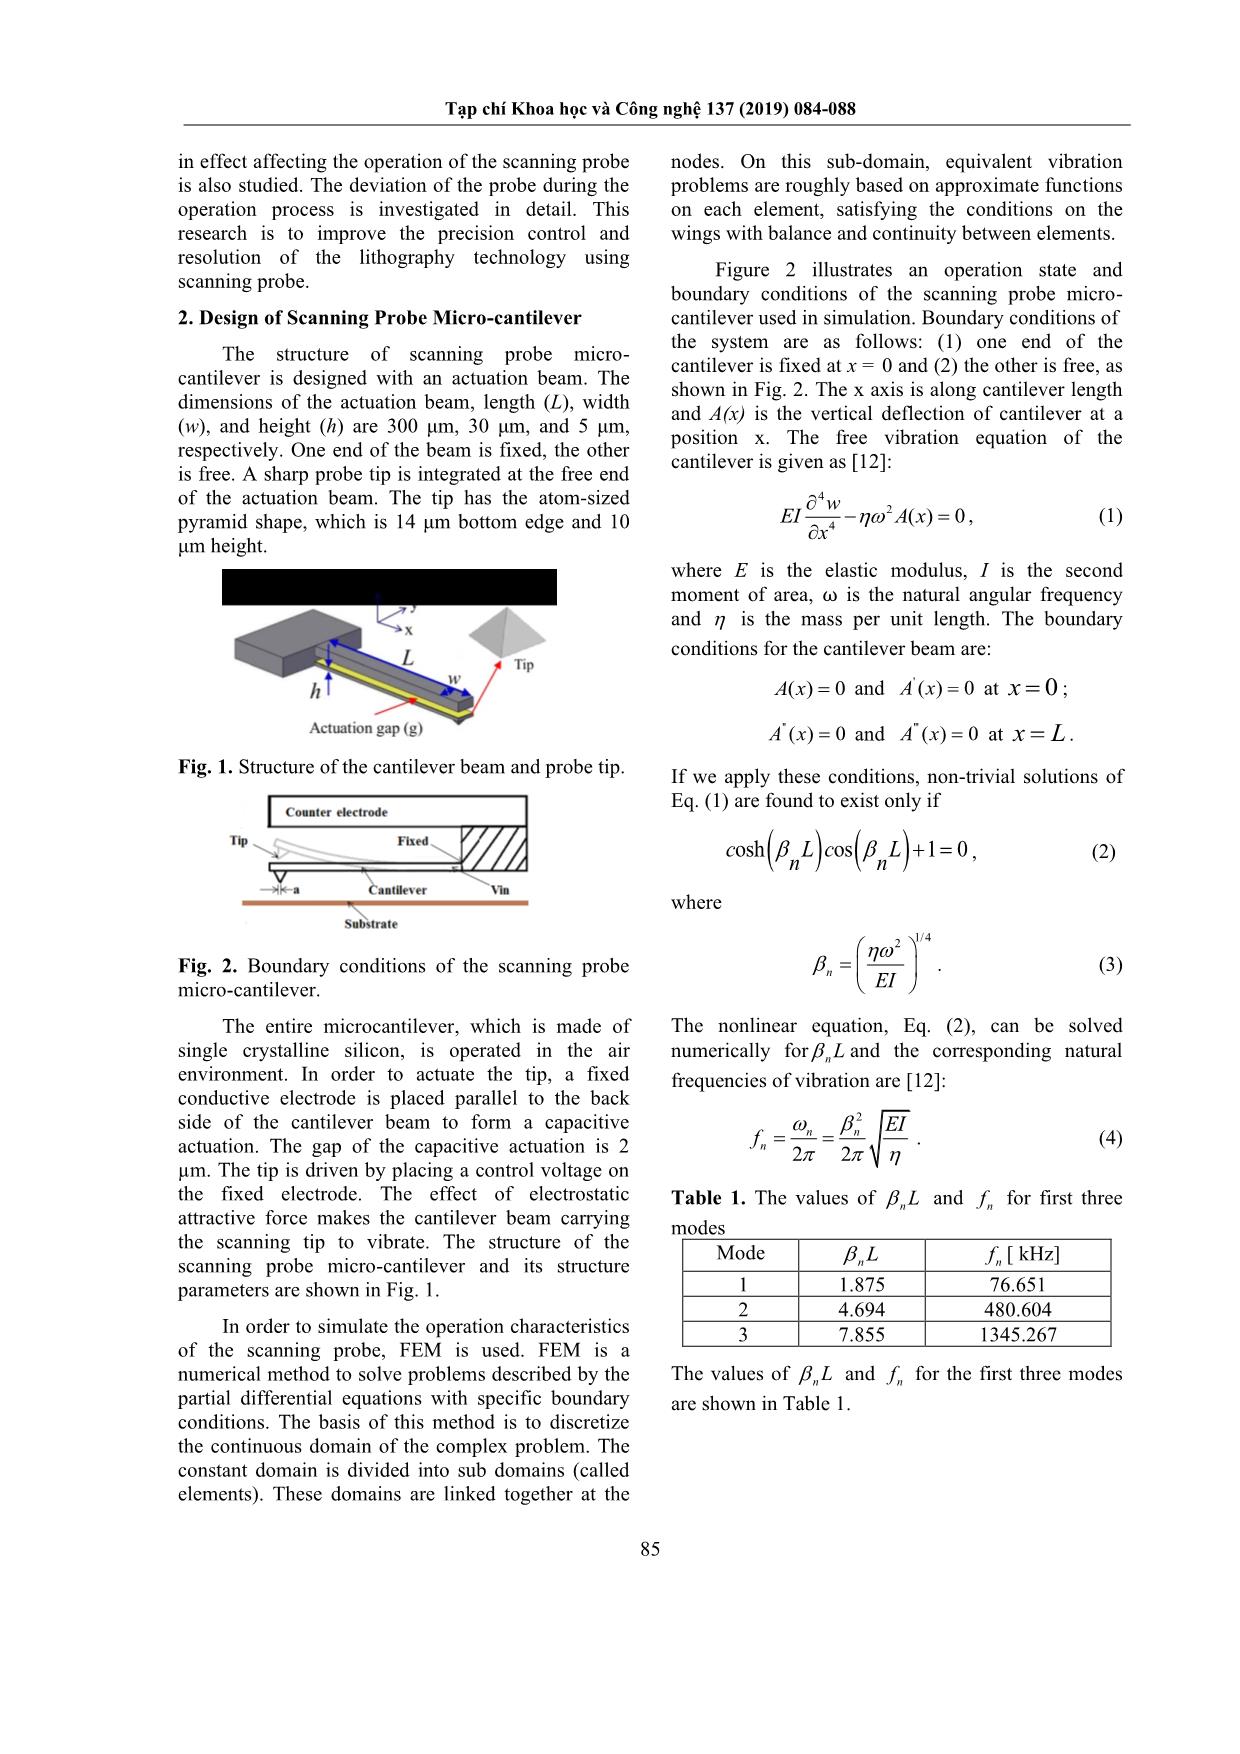 Design and simulation of scanning probe micro - cantilever for the scanning probe lithography trang 2